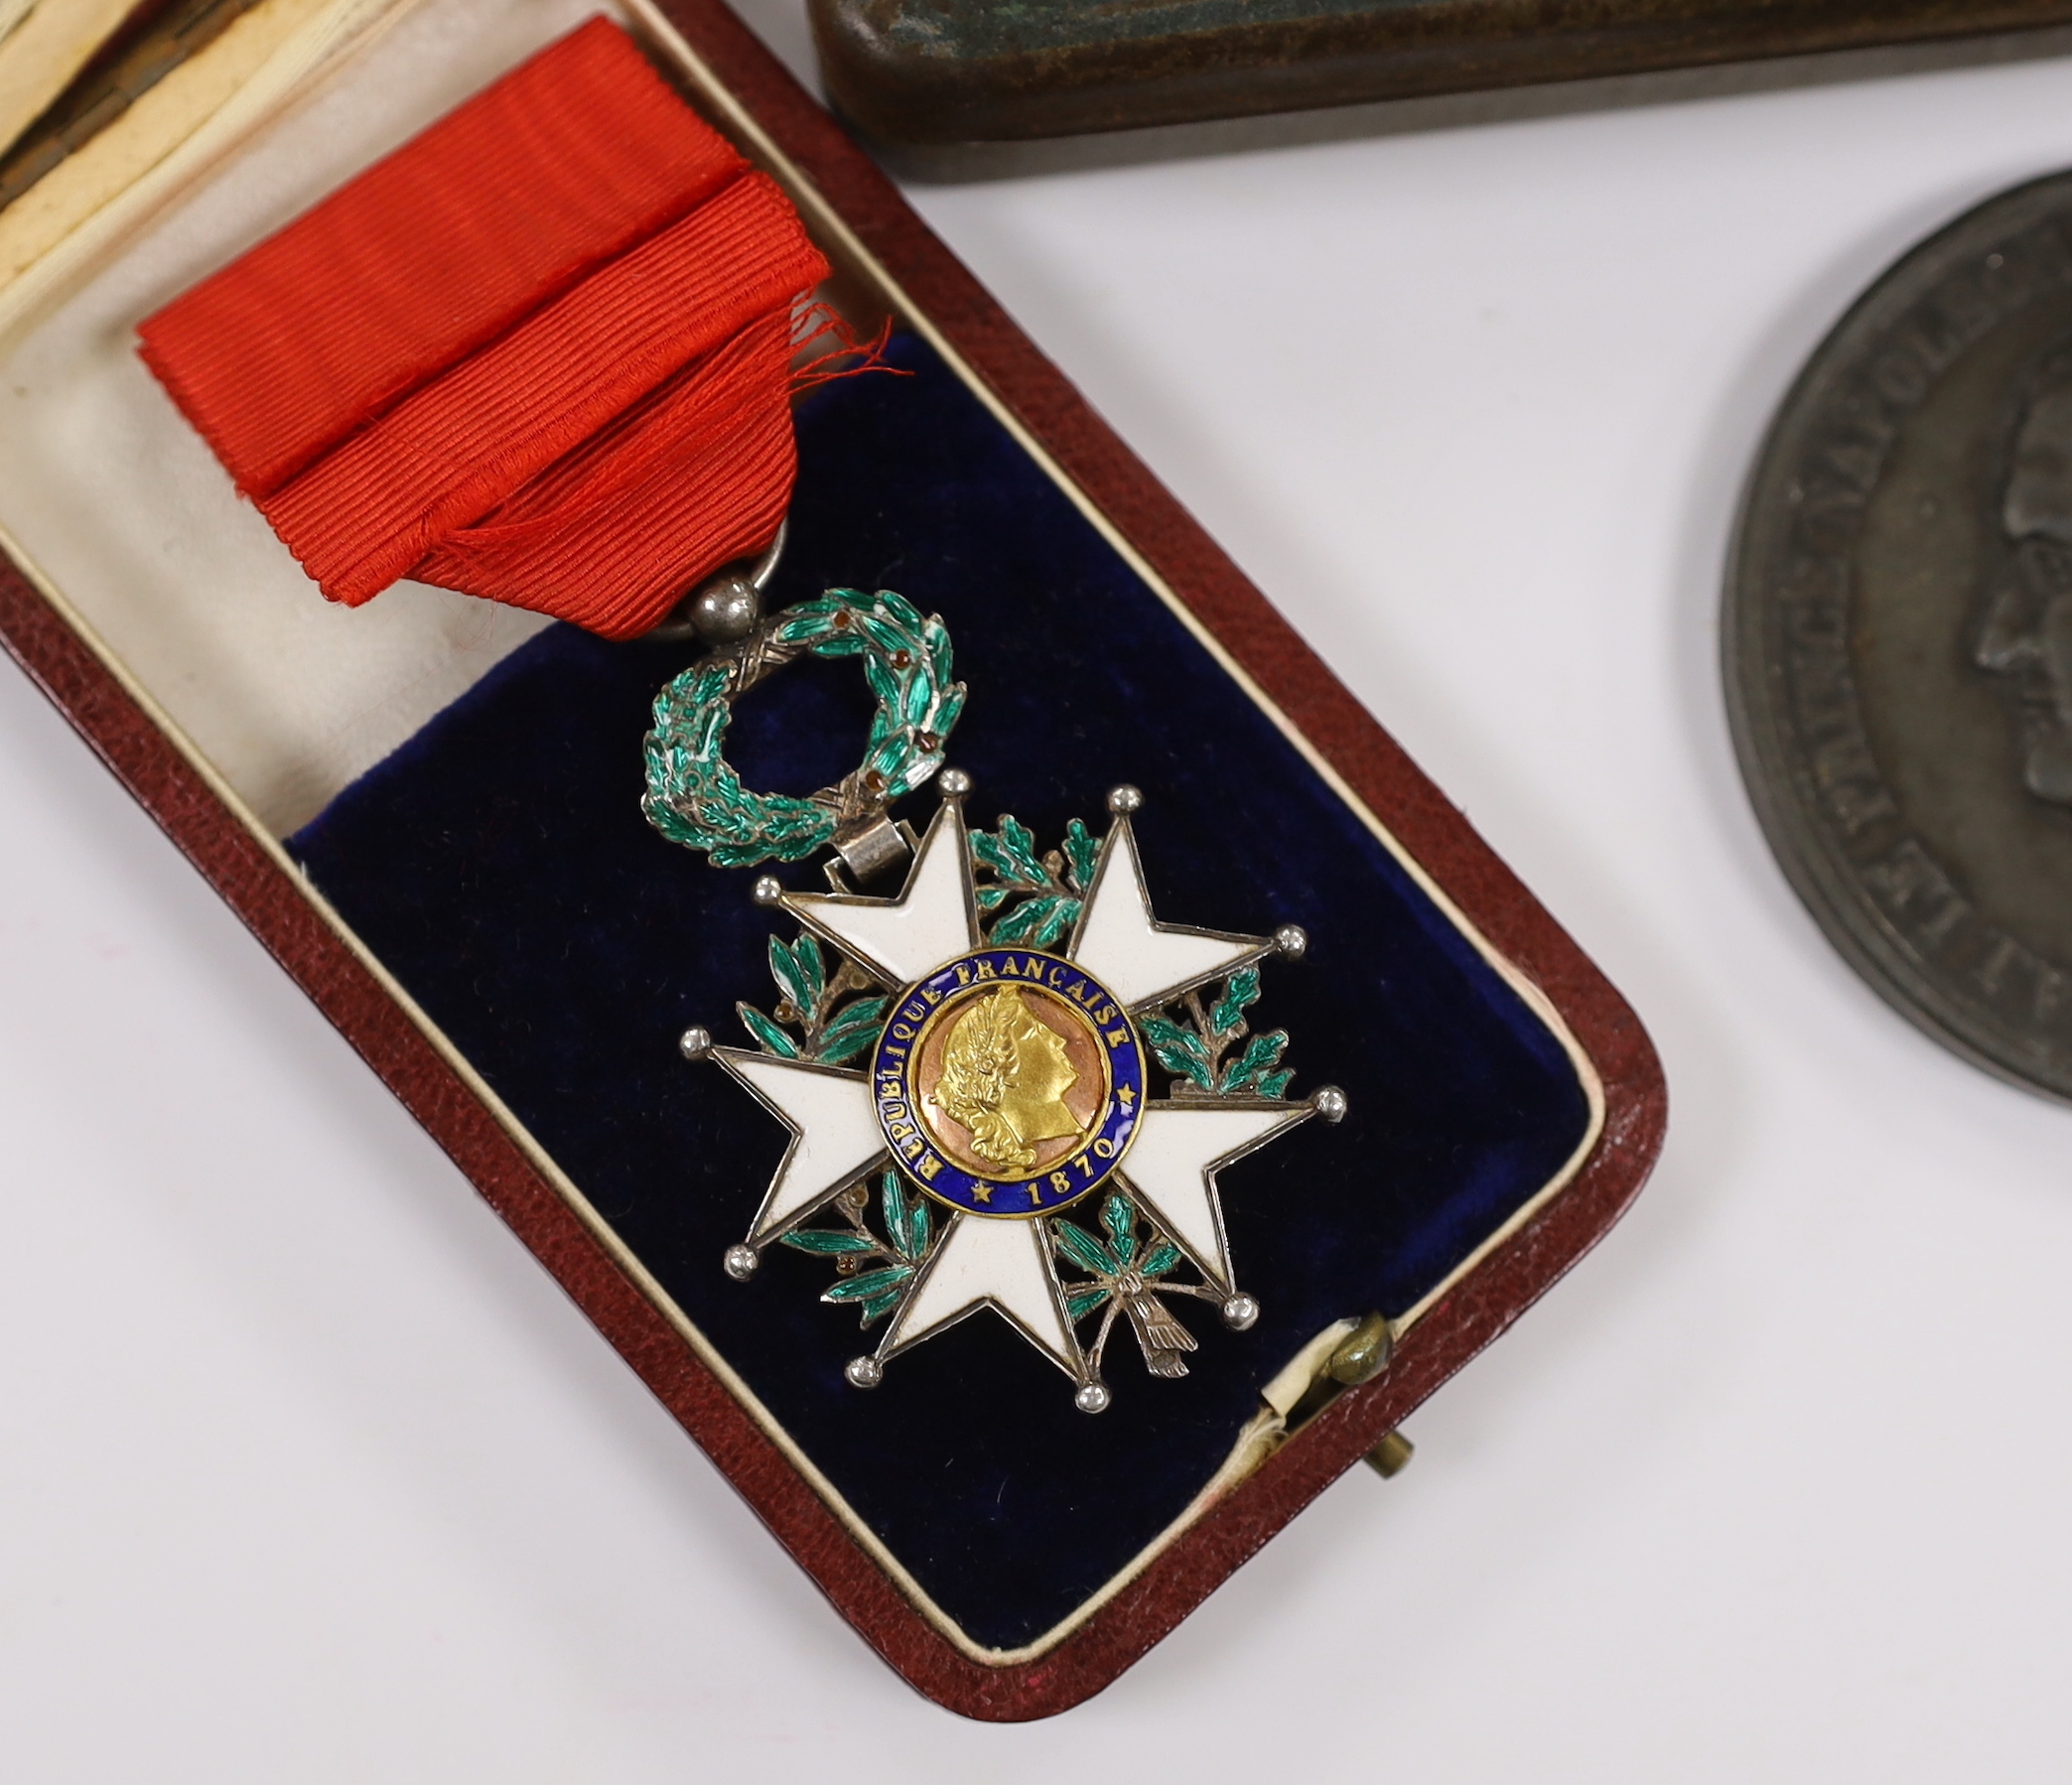 A WWII medal group comprising The Burma Star, The 1939-1945 Star, The Defence medal and The War medal, a cased 1870 Republique Francaise medal, a Victoria Golden Jubilee medallion, an 1855 Napoleon medallion, a Polish Cr